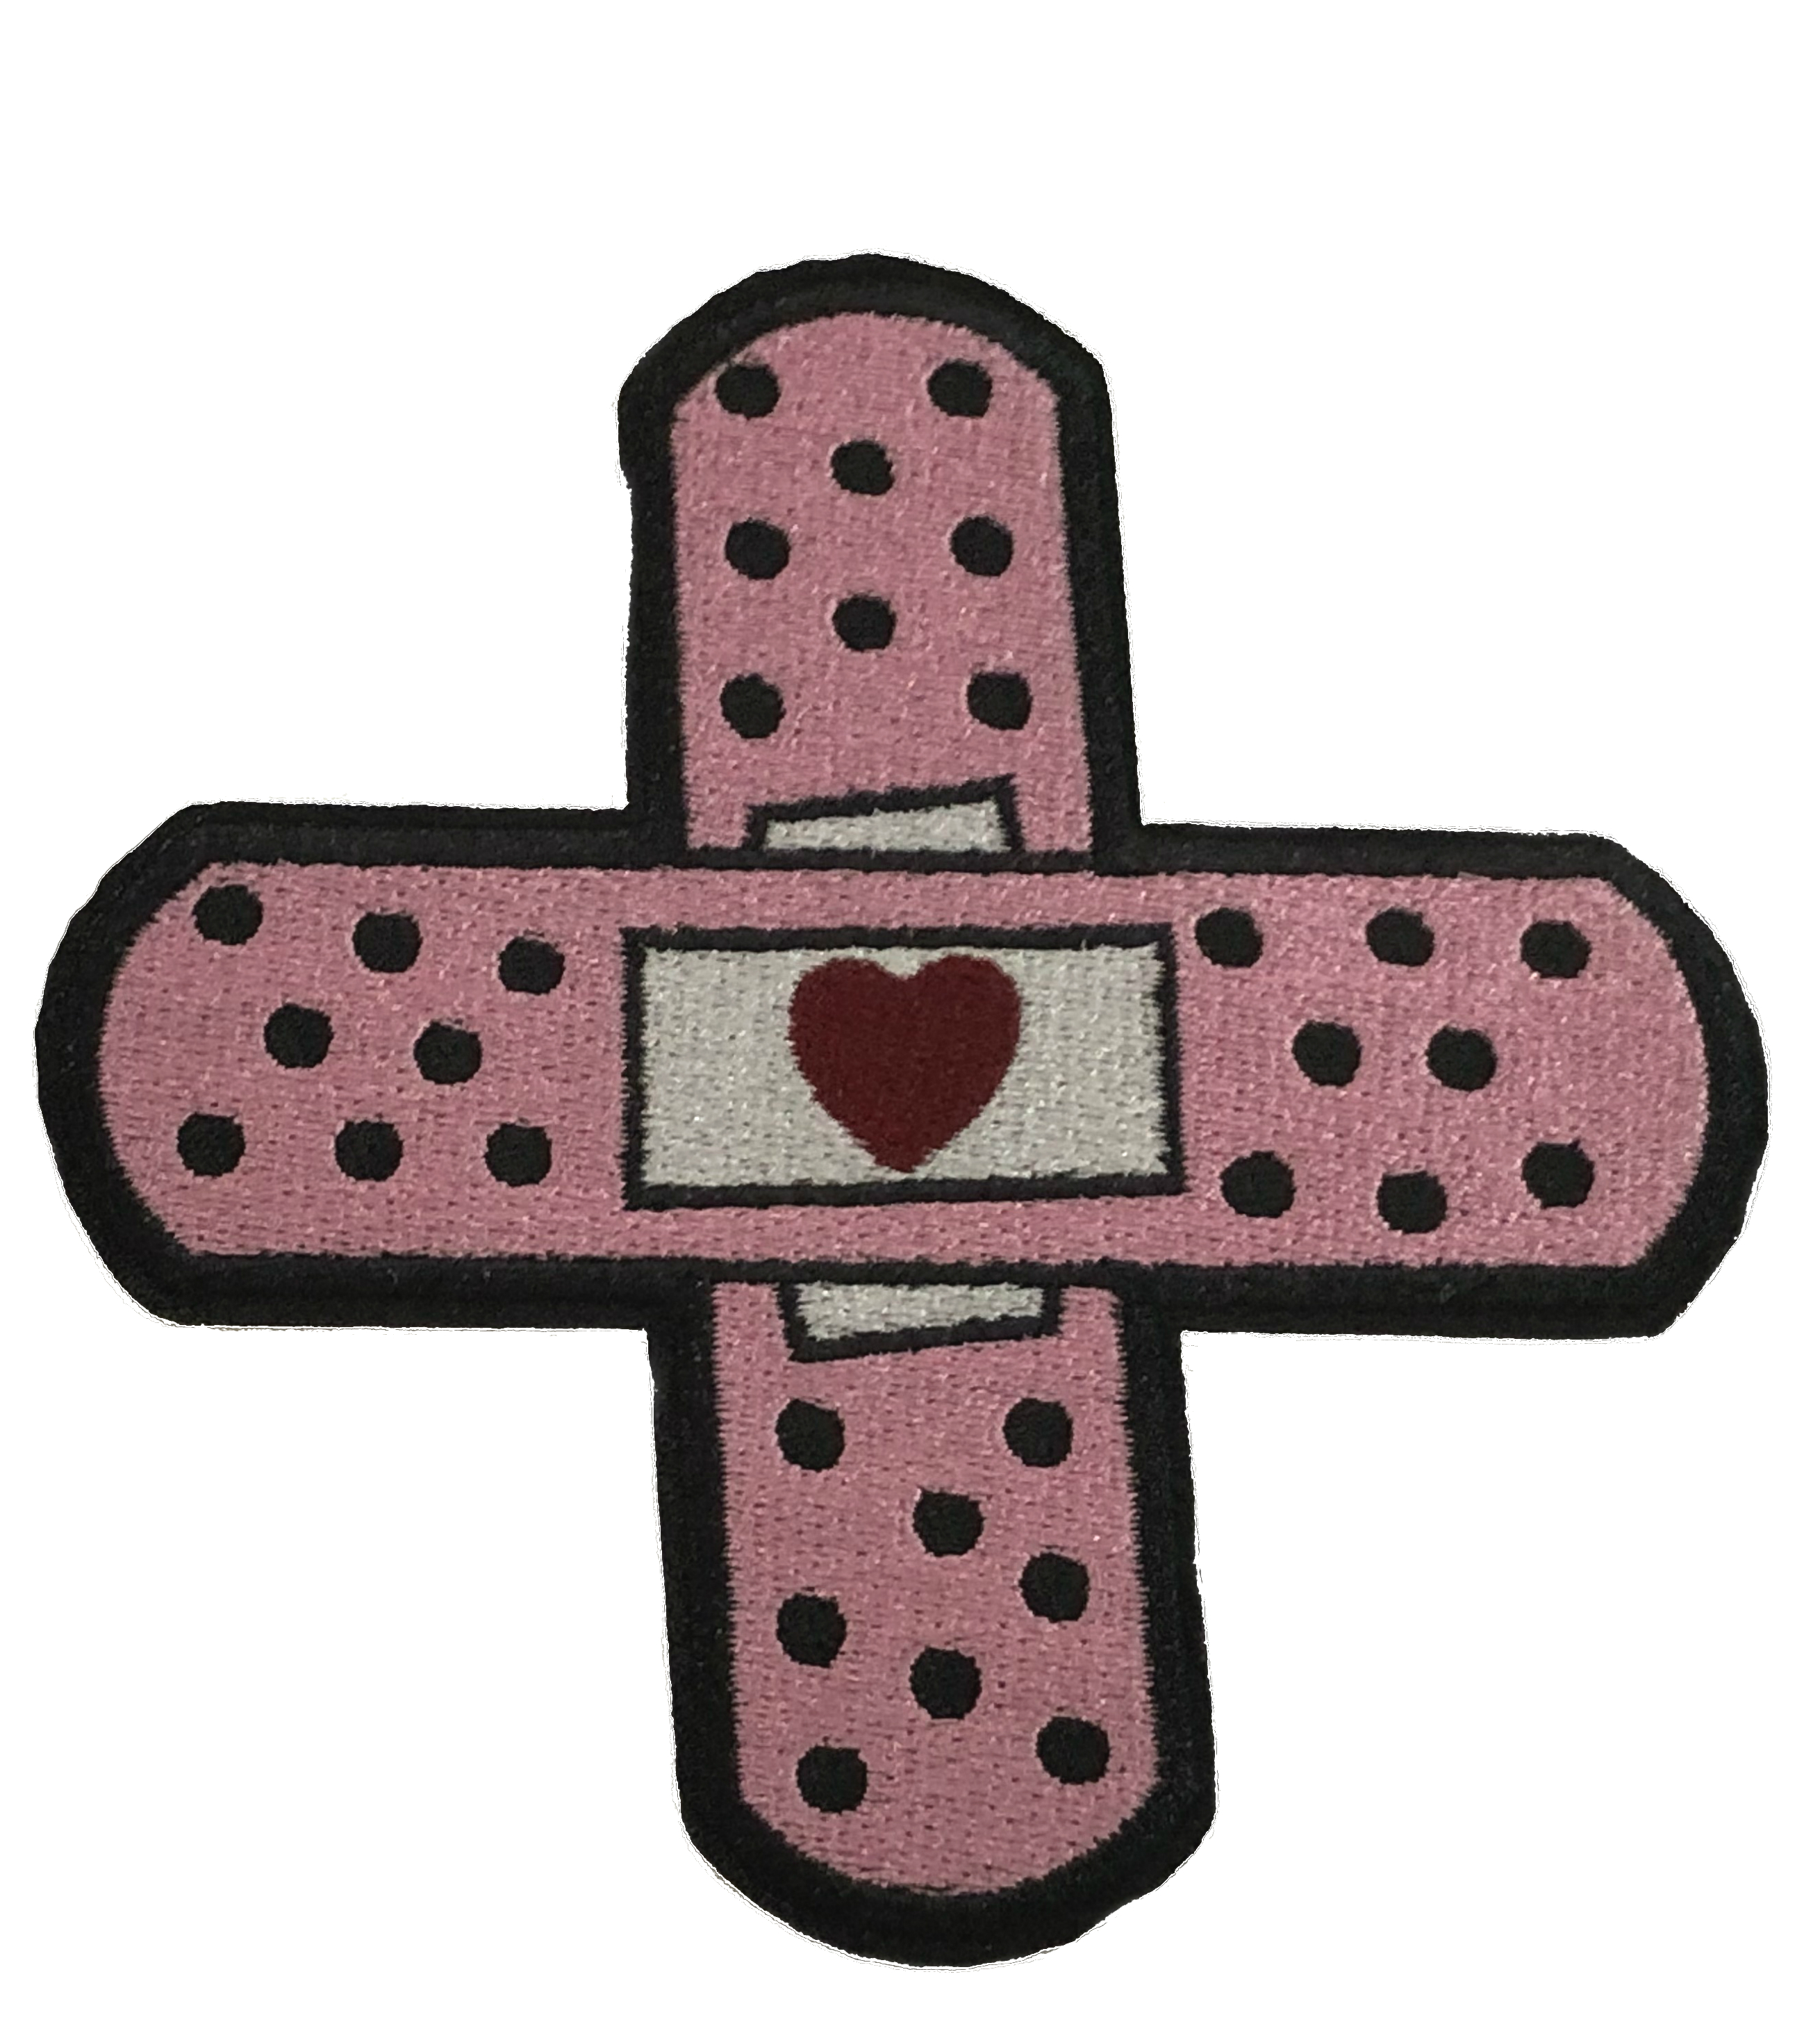 Band-Aid Cool Embroidered Patches Applique - 4.25 Embroidered Patch Iron-On  or Sew-On Decorative Embroidery Patches - First Aid Kids Cute Fun - Badge  Emblem - Novelty Applique 